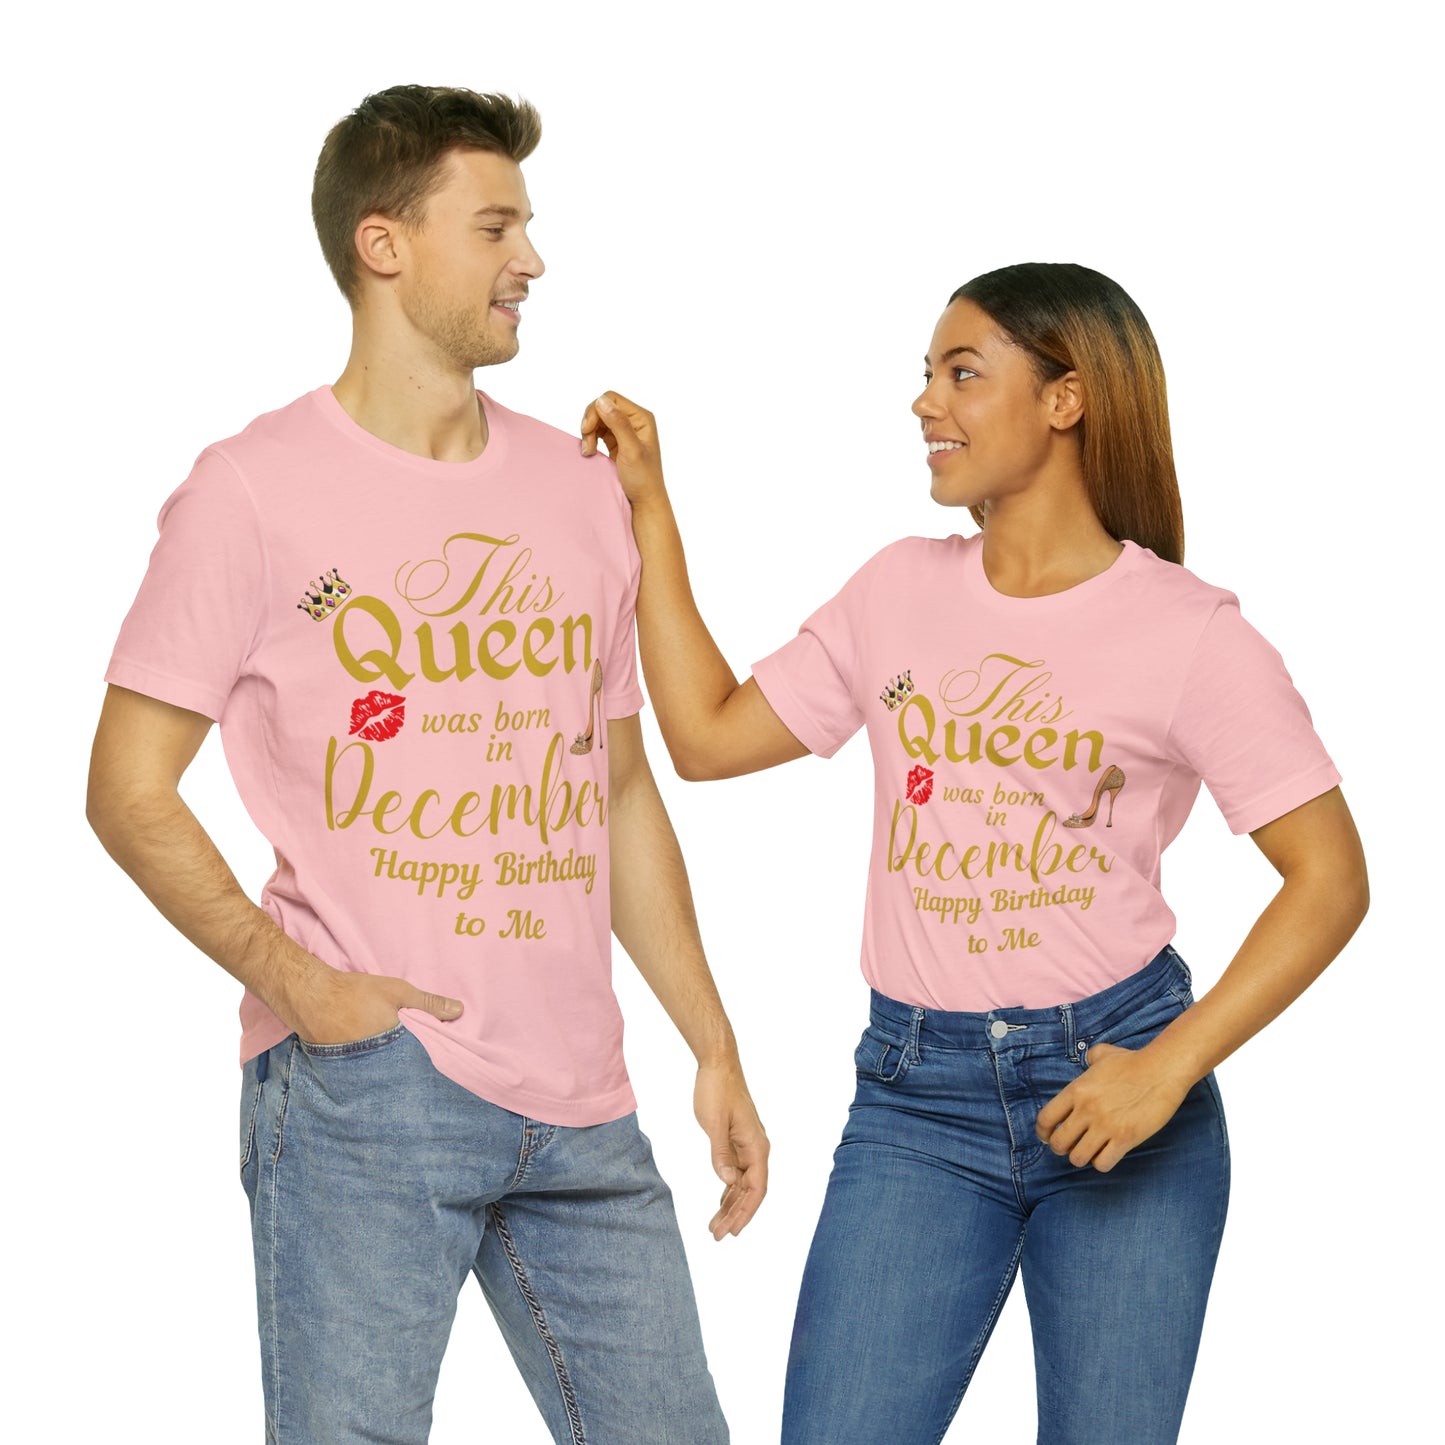 Birthday Queen Shirt, Gift for Birthday, This Queen was born in December  Shirt, Funny Queen Shirt, Funny Birthday Shirt, Birthday Gift